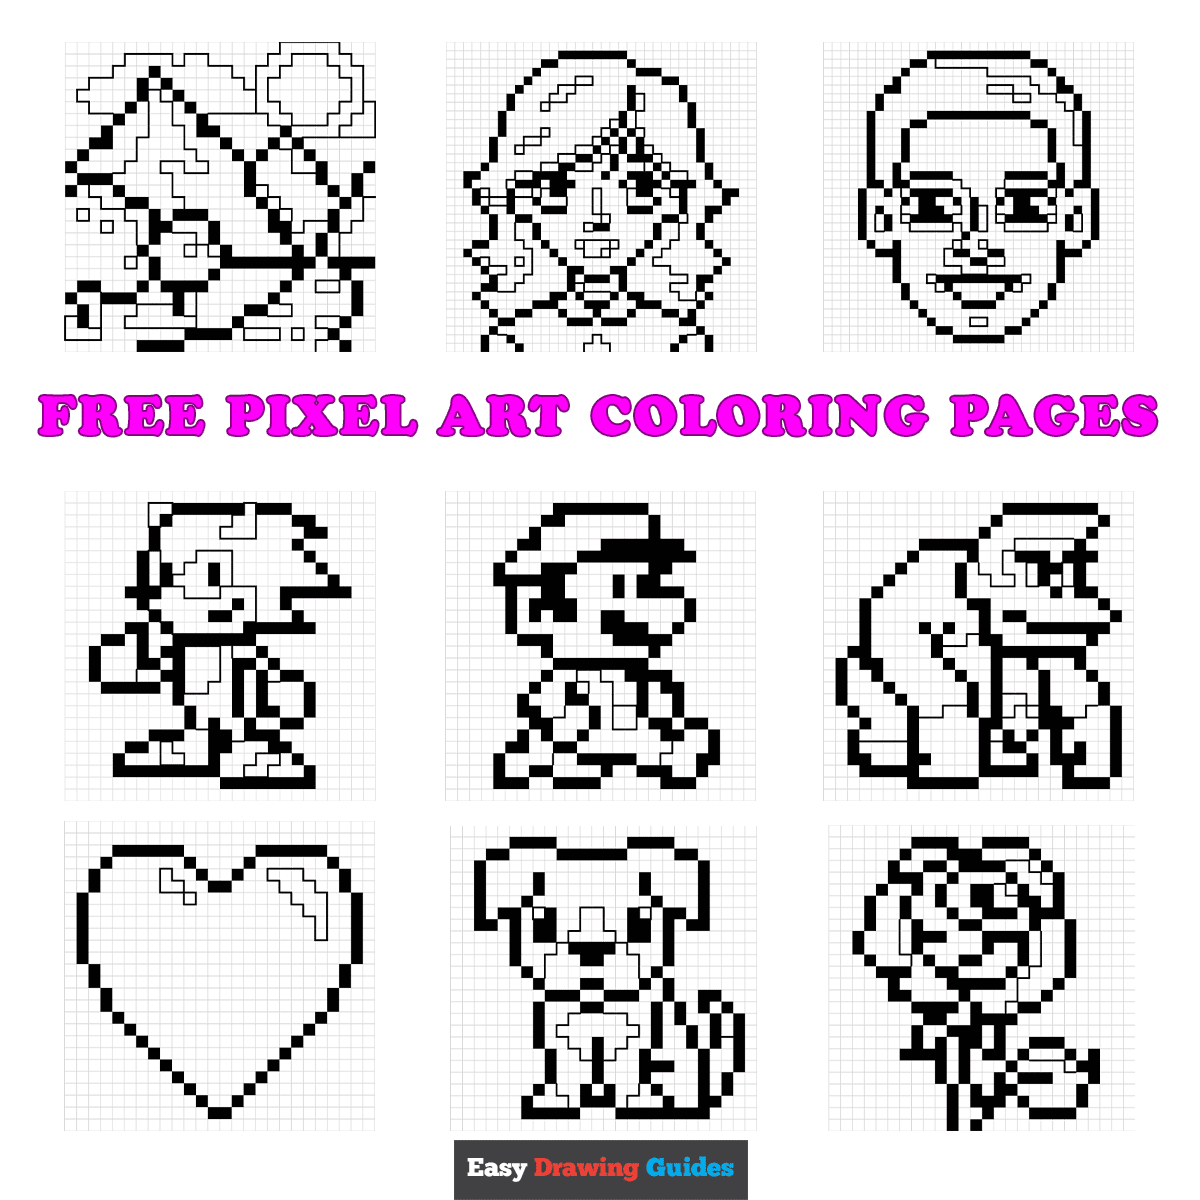 Free printable pixel art coloring pages for kids